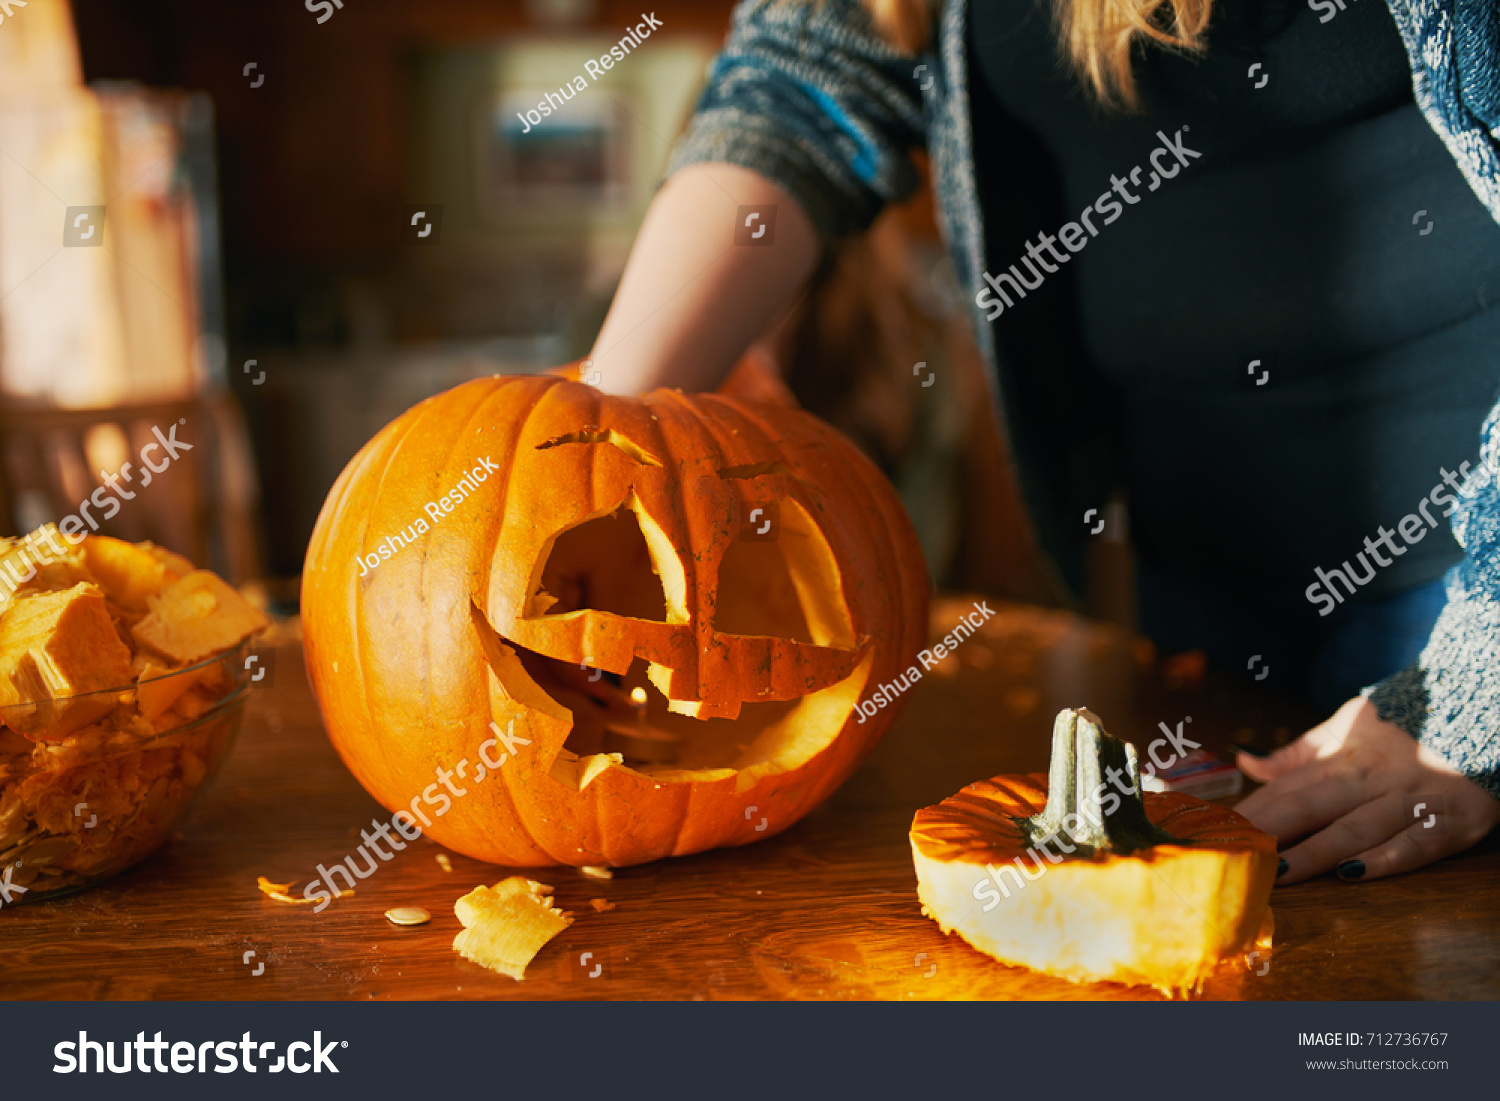 family fun activity - carved pumpkins into jack-o-lanterns for halloween close up #712736767